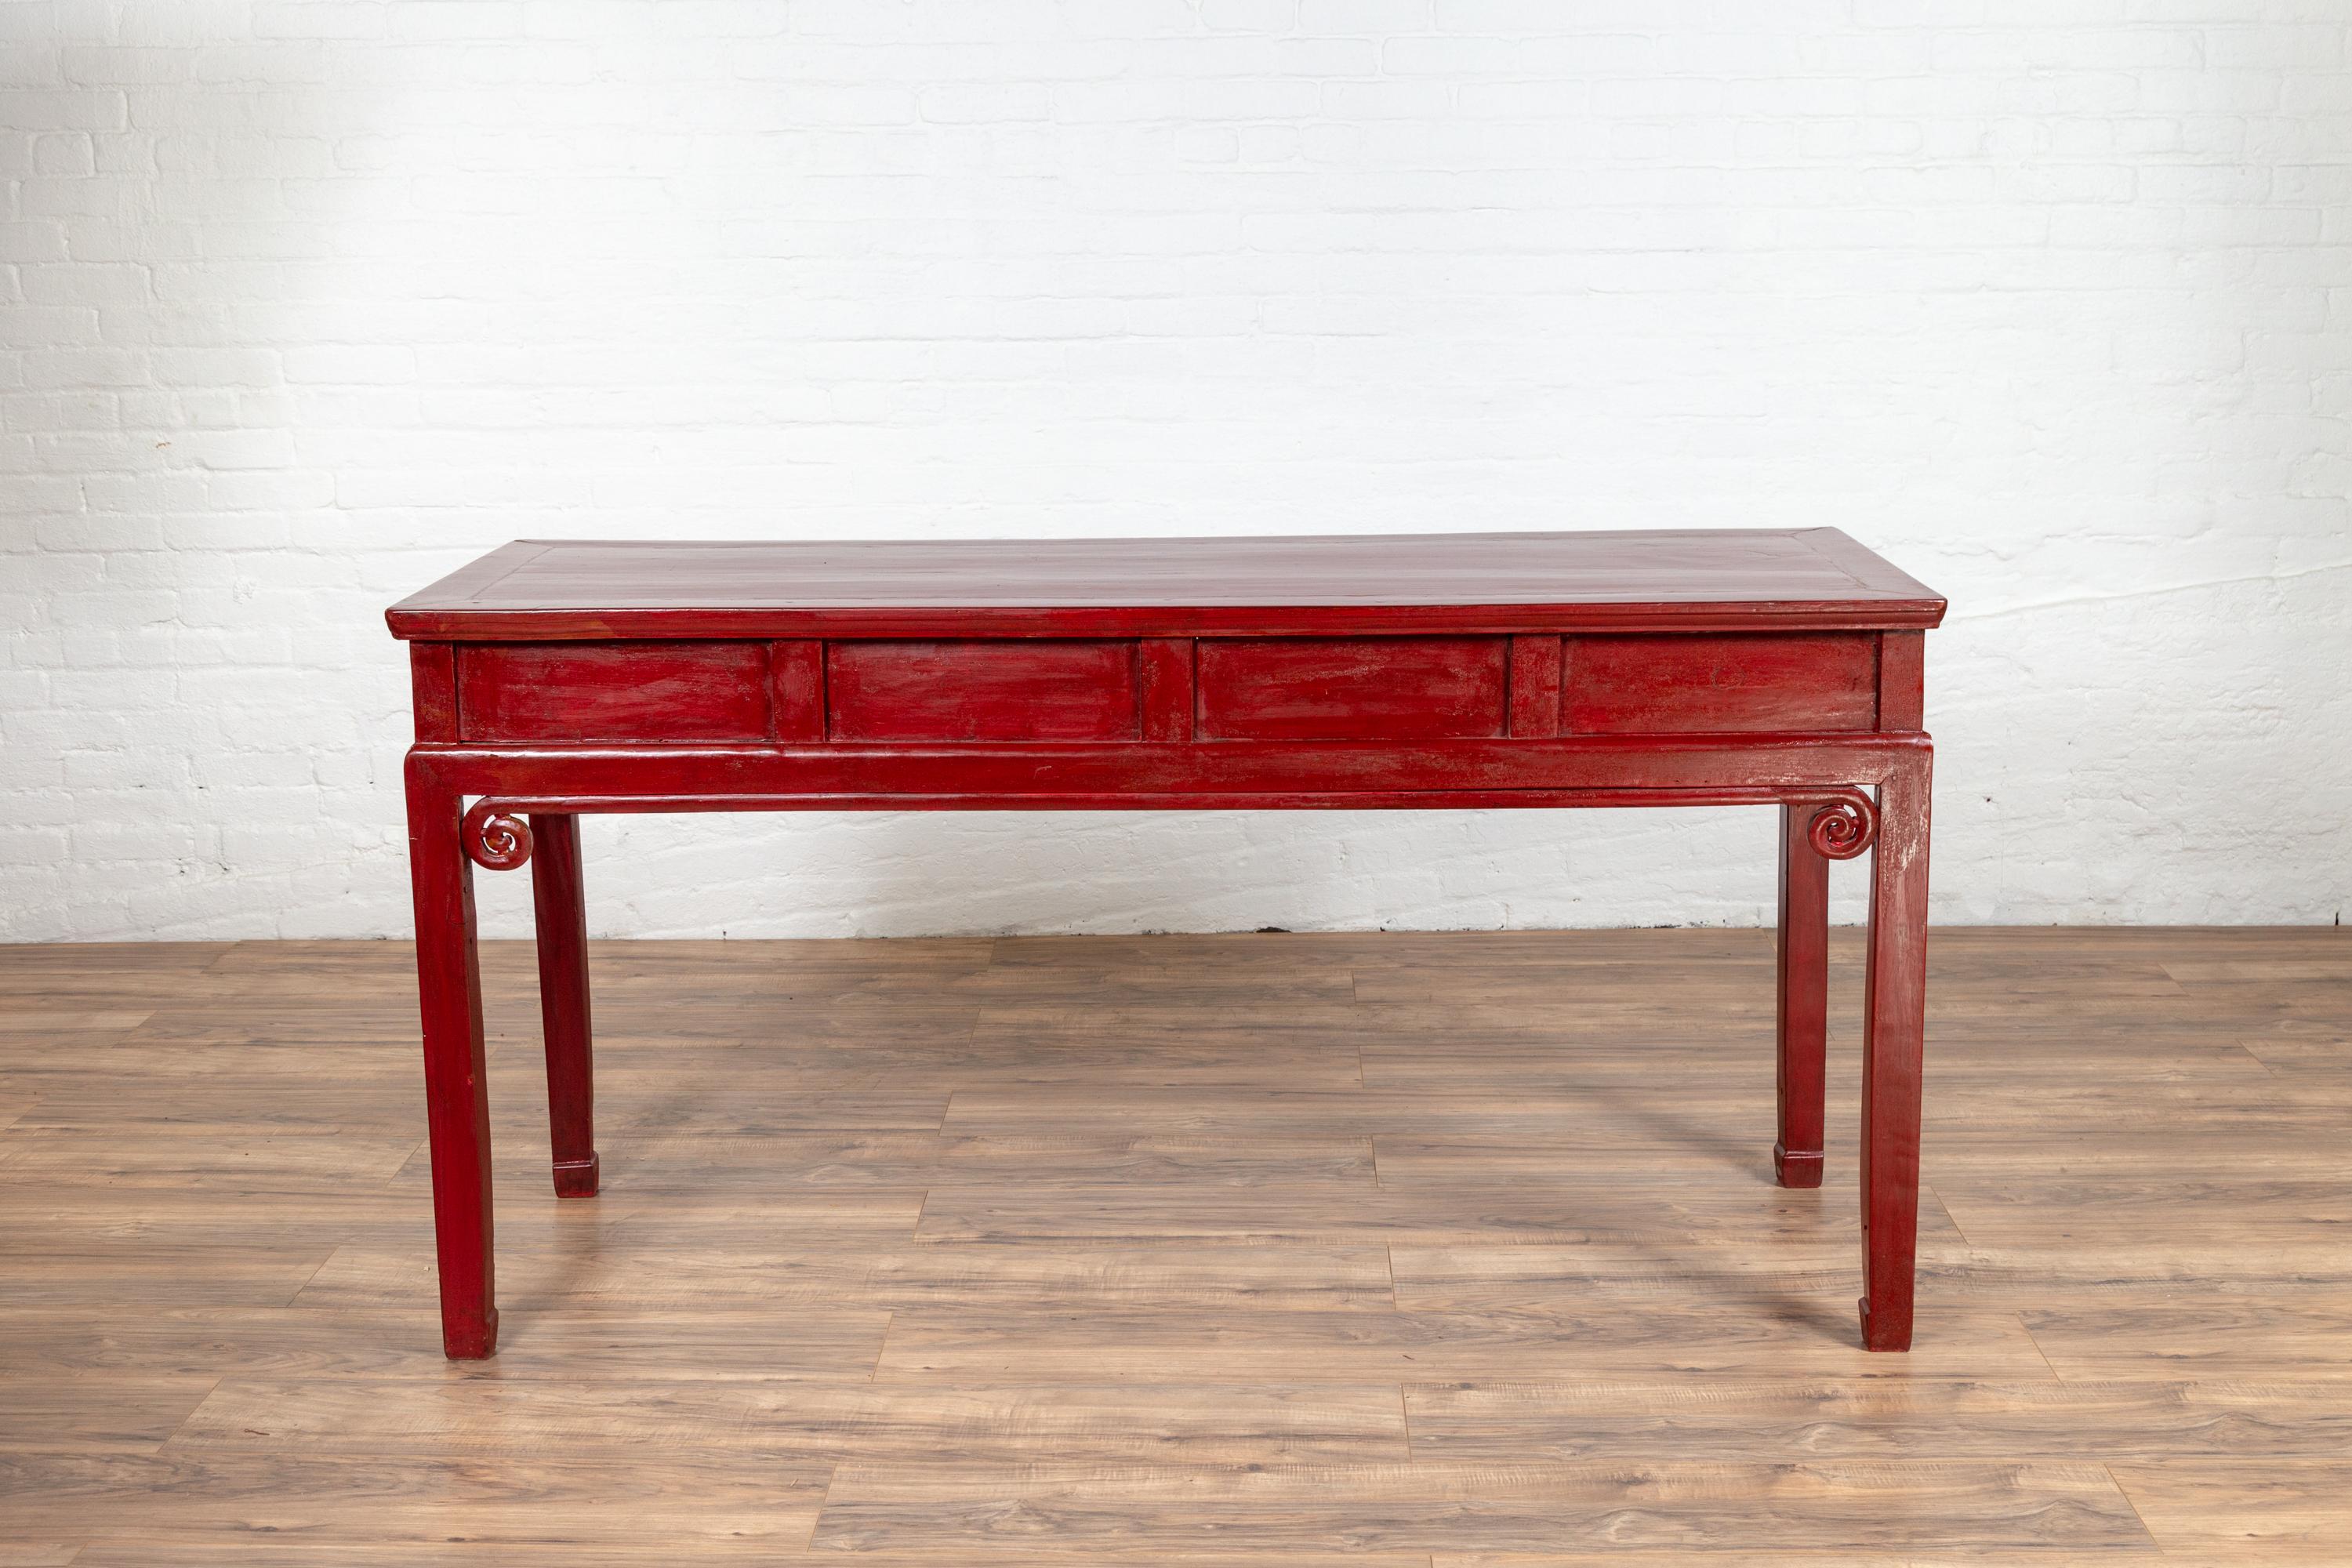 Chinese Antique Red Lacquered Wooden Desk with Four Drawers and Curling Scrolls 12